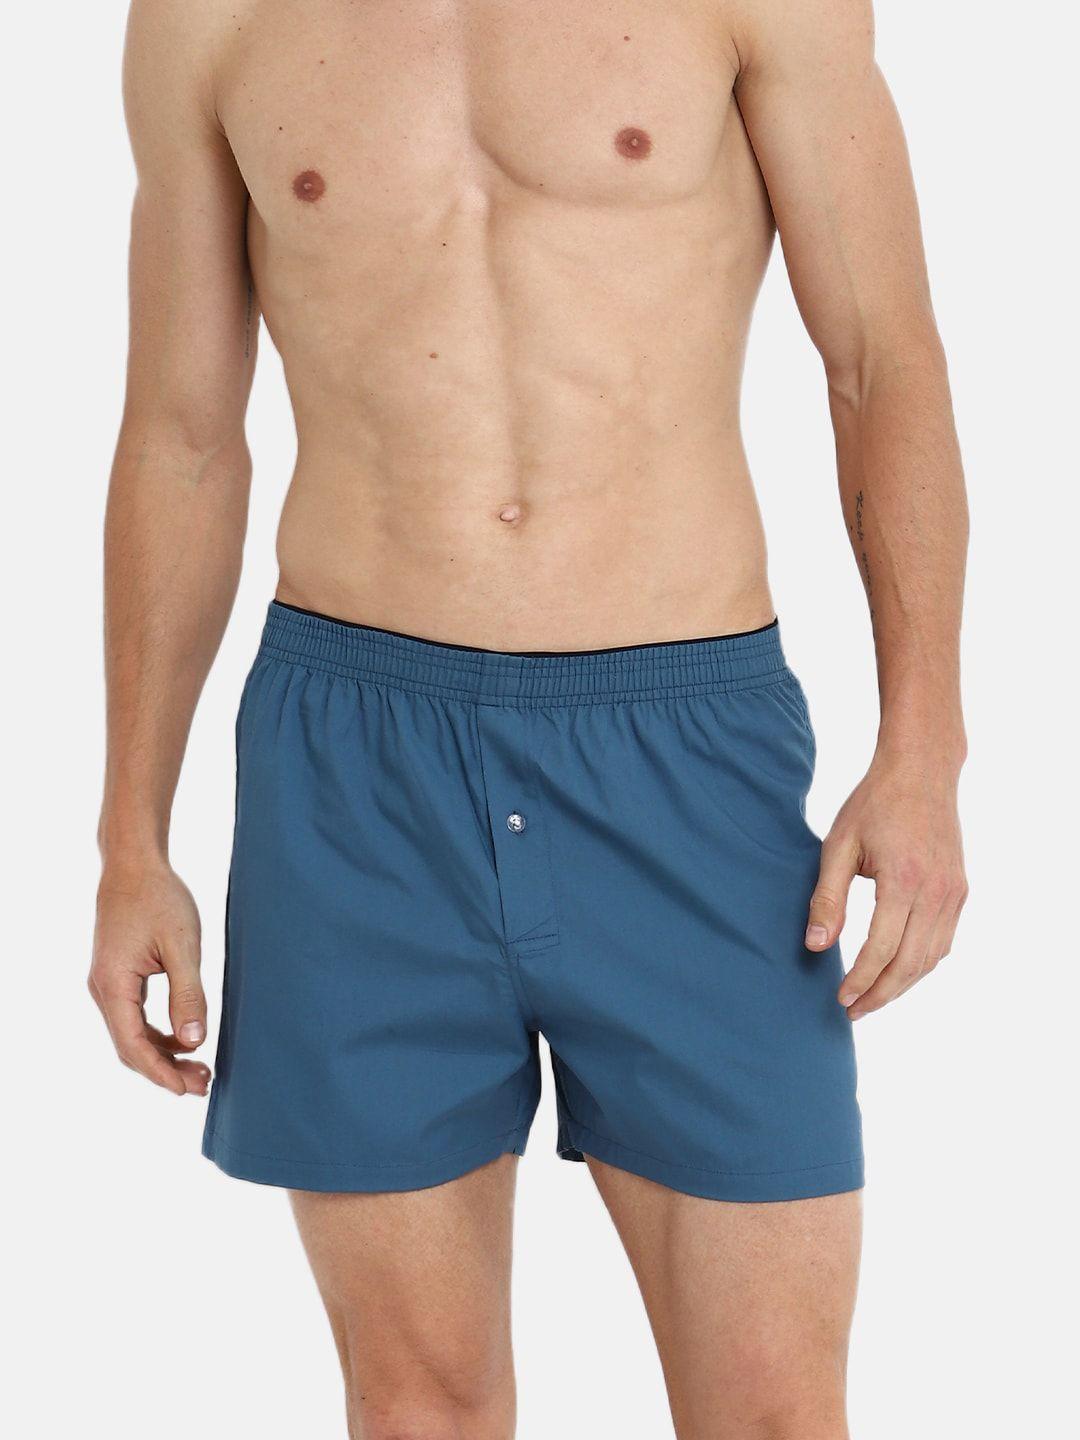 Almo Wear Men Teal Blue Solid Pure Cotton Boxers B002-S-124